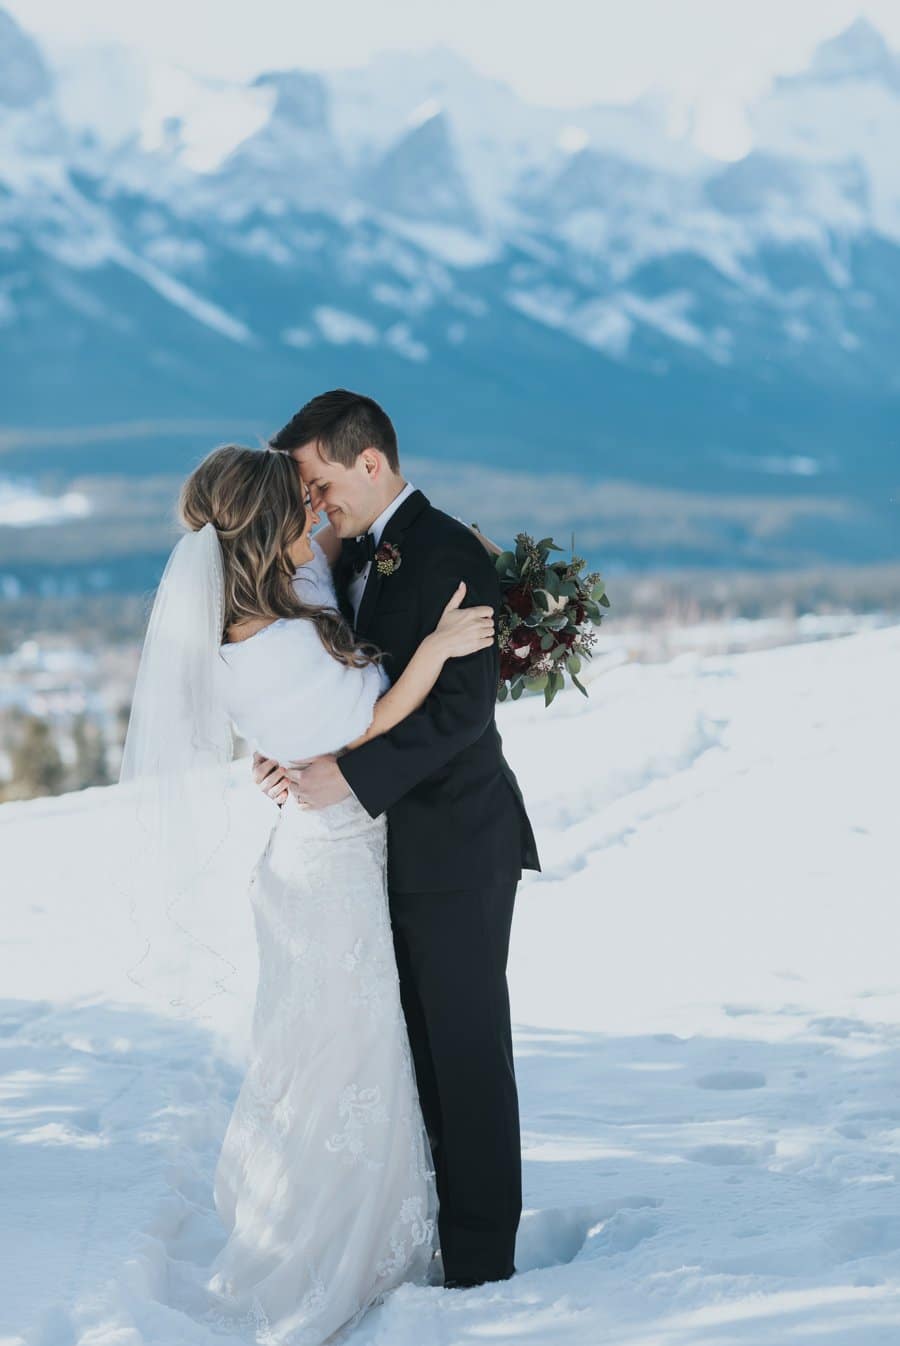 Canmore winter wedding photography